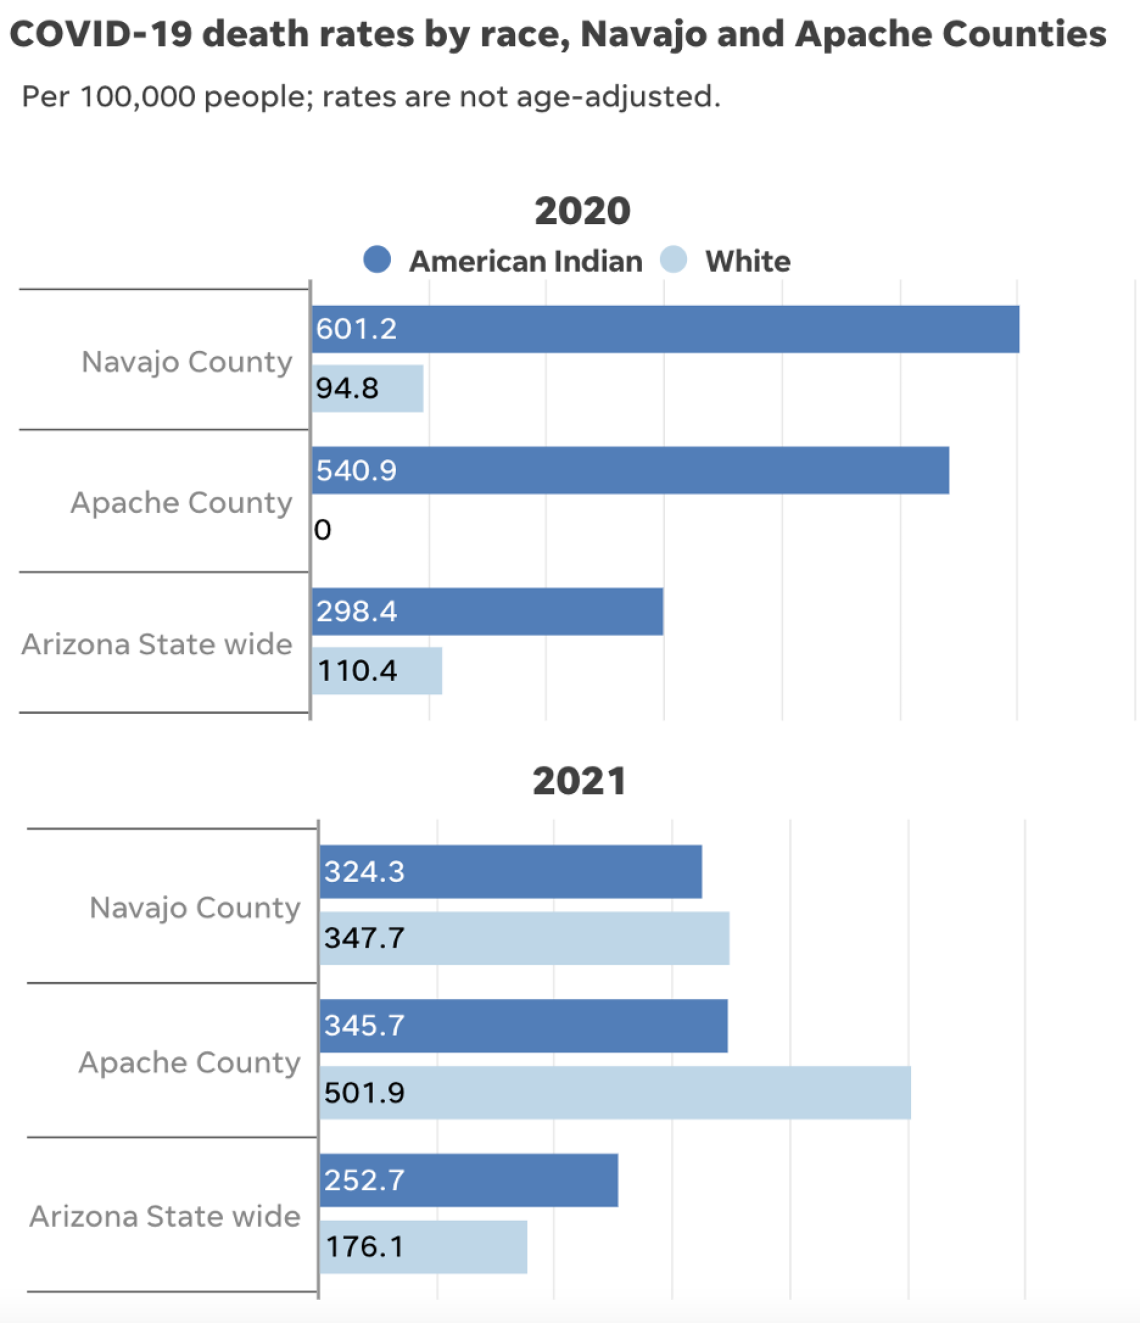 Covid Deaths Rates - Navajo and Apache Counties